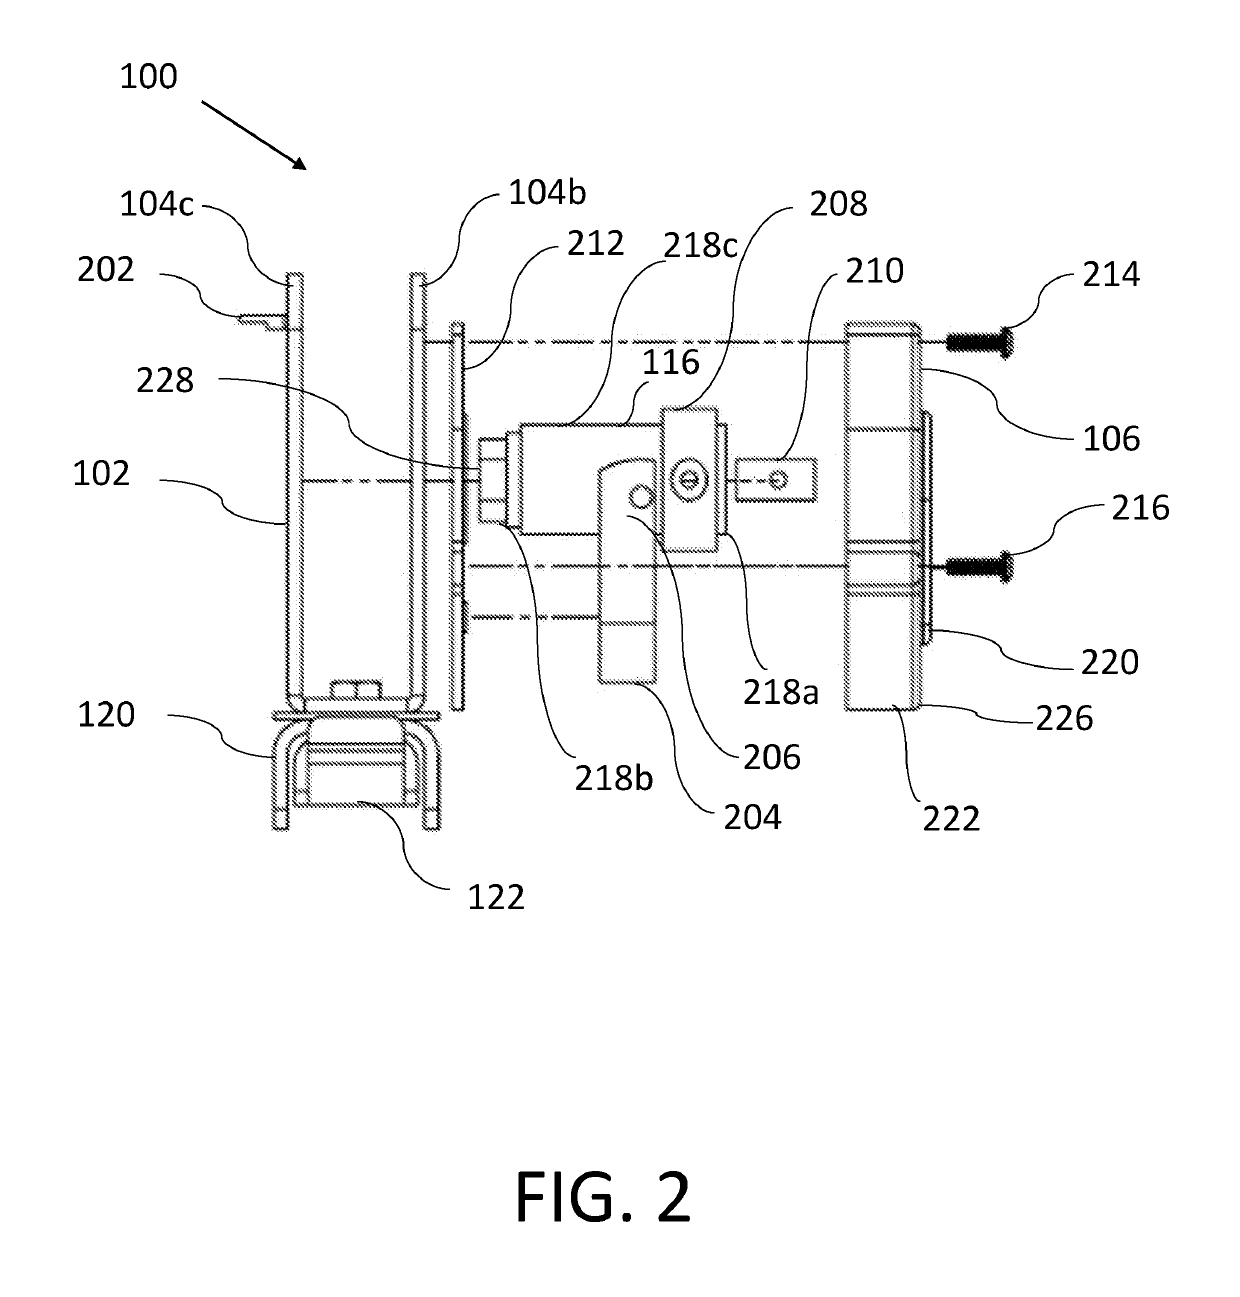 Running-end spool containment device and system